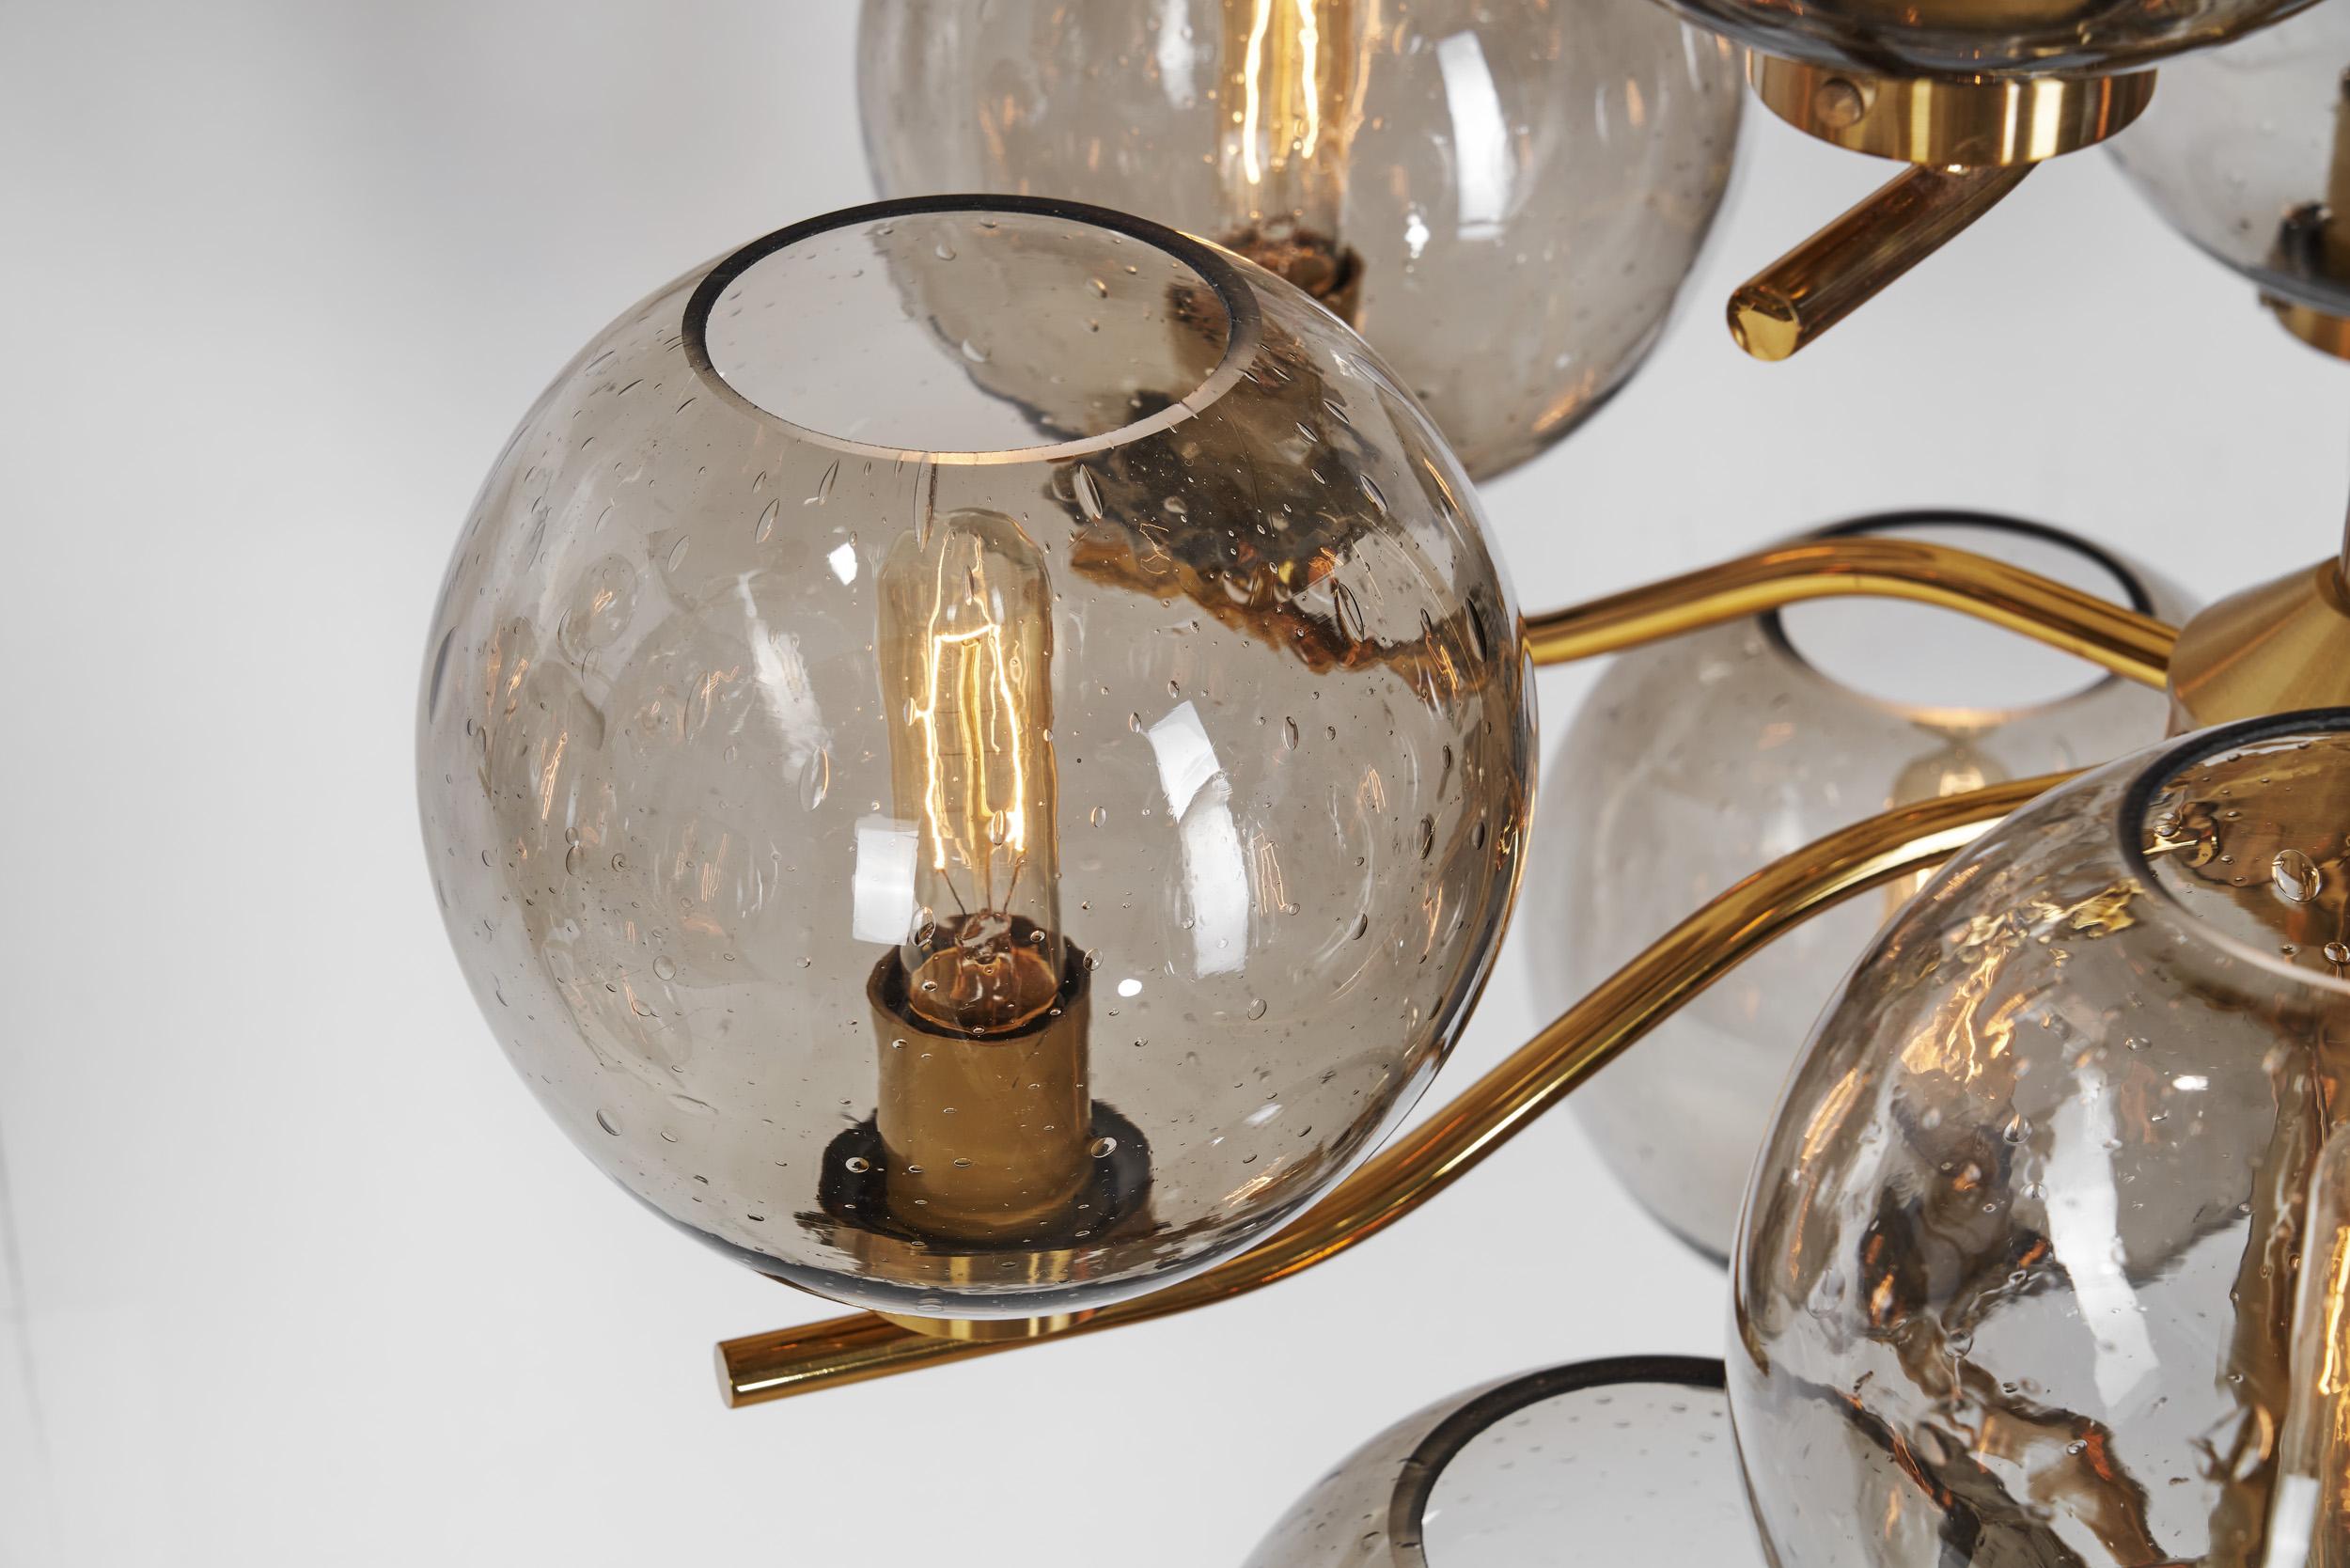 Holger Johansson Chandeliers with 12 Smoked Glass Shades, Sweden 1970s For Sale 3